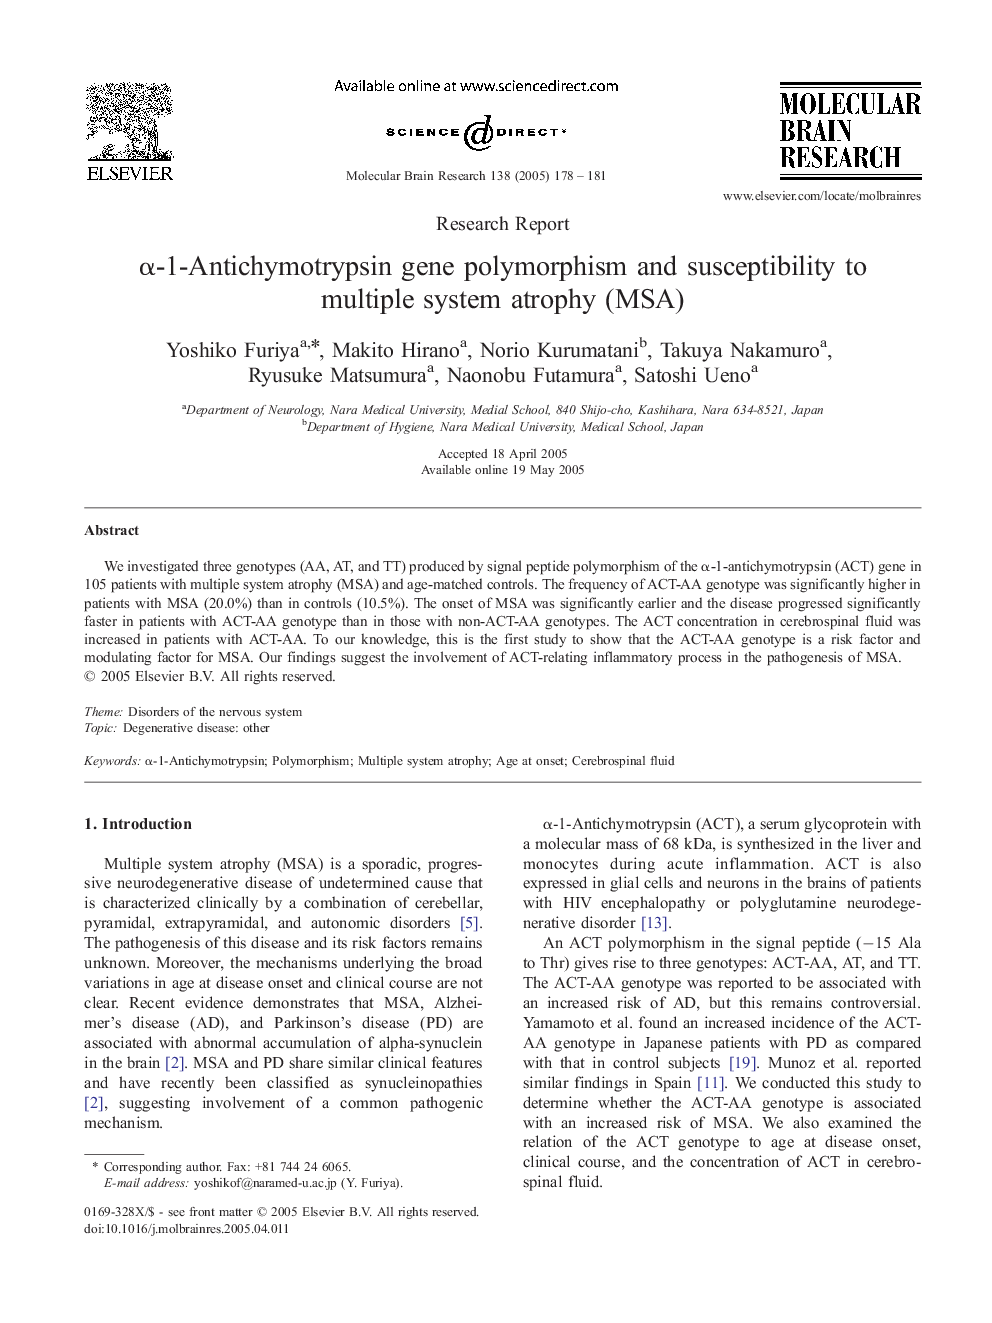 Î±-1-Antichymotrypsin gene polymorphism and susceptibility to multiple system atrophy (MSA)